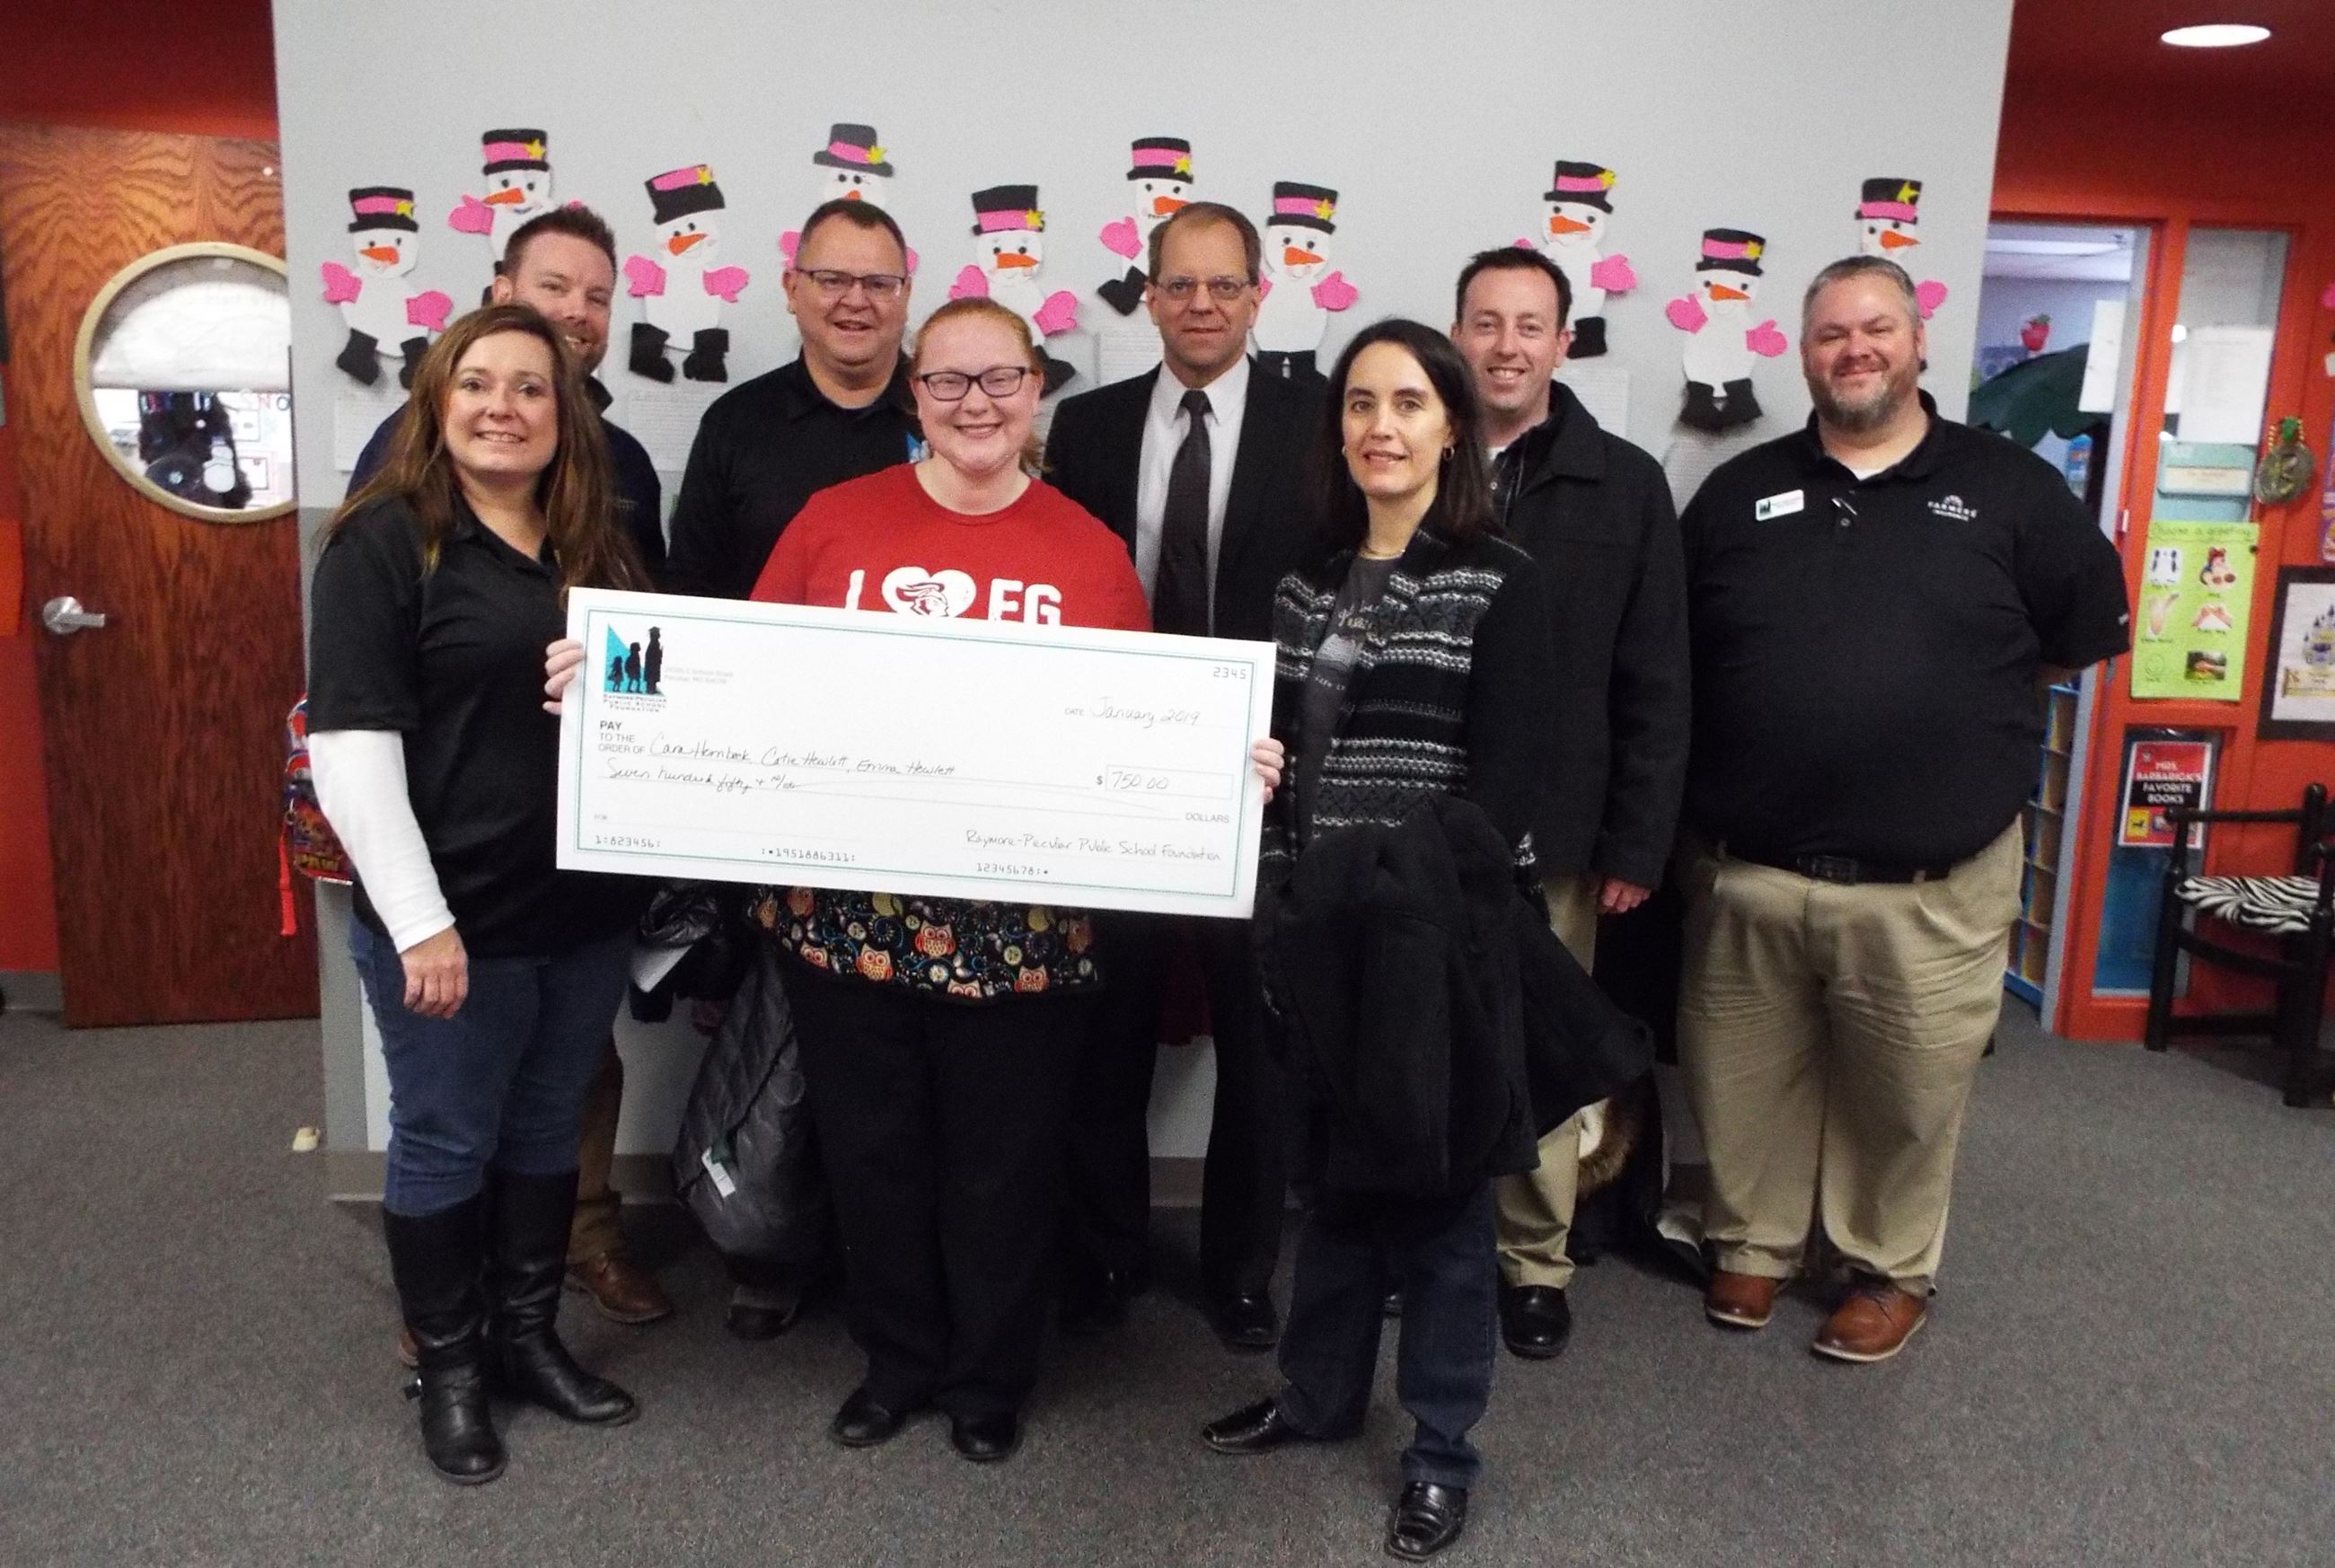  Grant to support Special Olympics